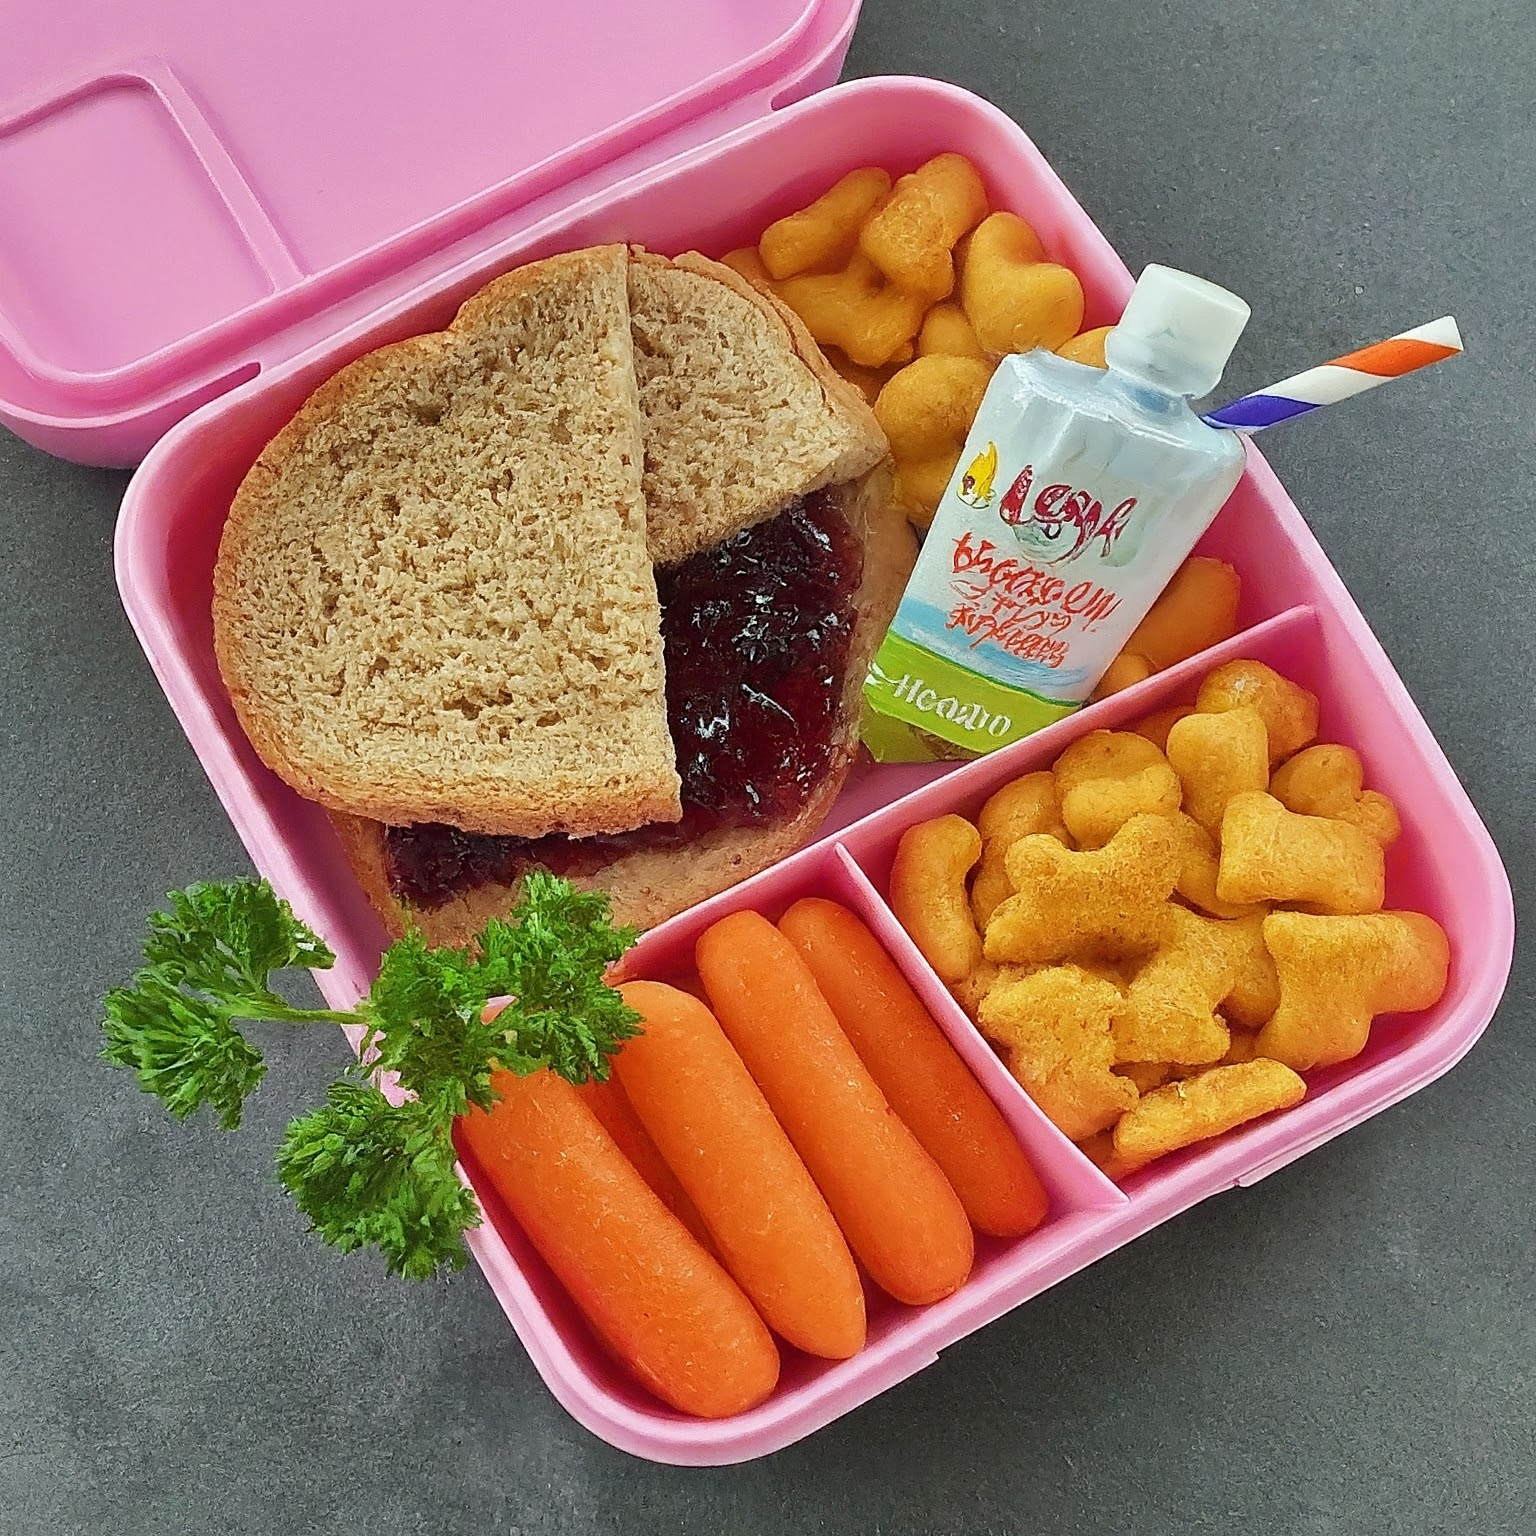 My daughters go to lunch. Jelly Sandwich, baby carrots, gold fish and yogurt pouch.